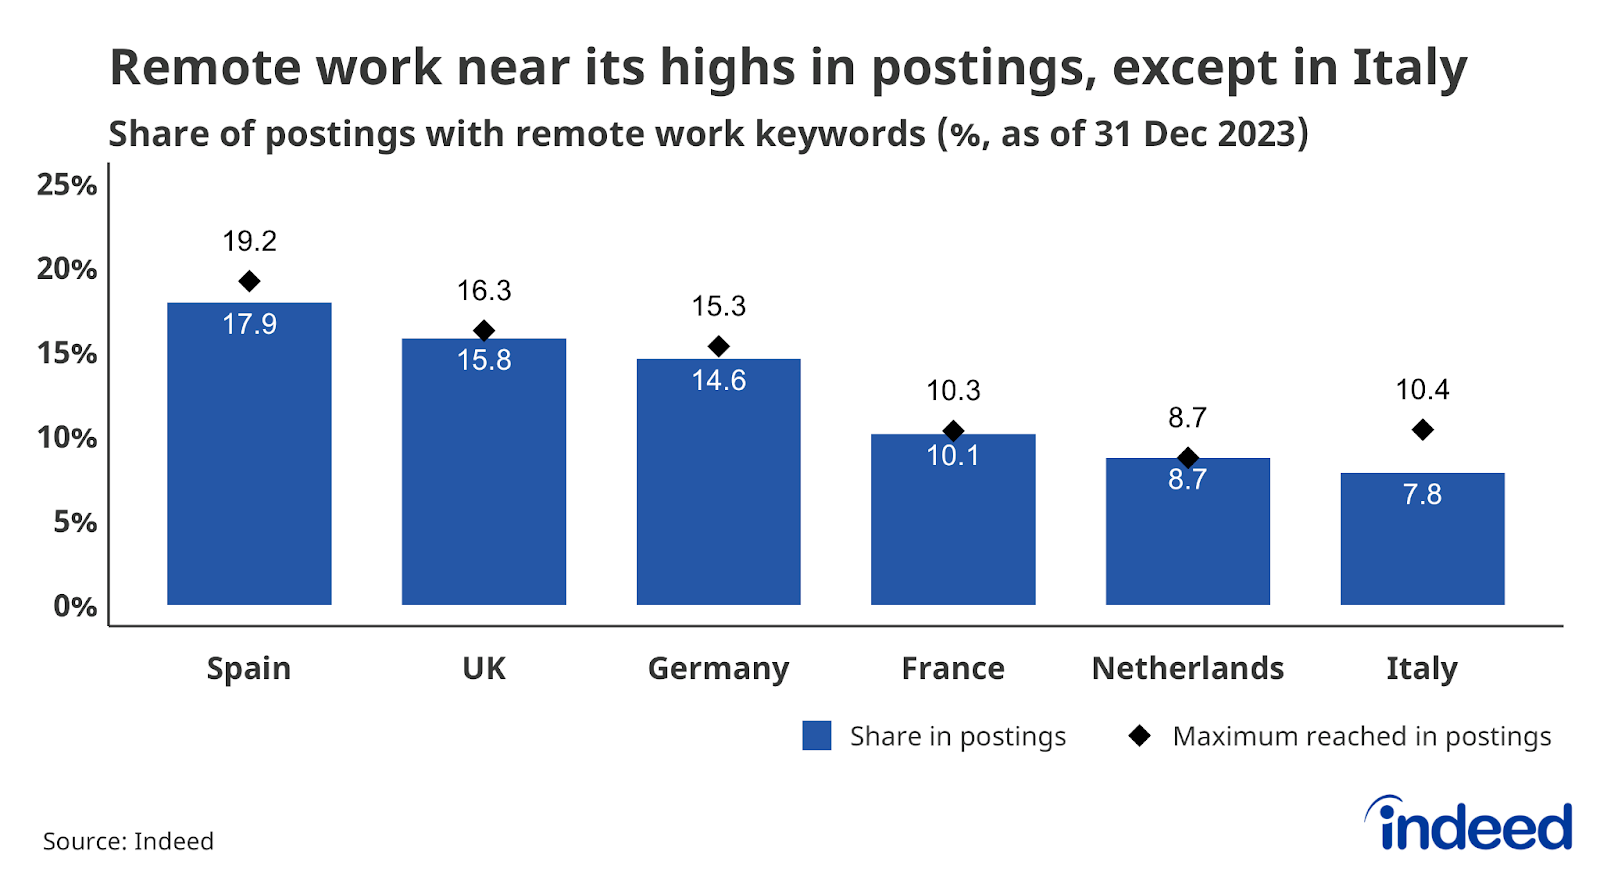 Bar chart titled "Remote work near its highs in postings, except in Italy" shows the proportion of Indeed postings containing remote work-related keywords for Spain, the United Kingdom, Germany, France, the Netherlands, and Italy, as of 31 December 2023, alongside their highest levels reached during the 2019-2023 period.